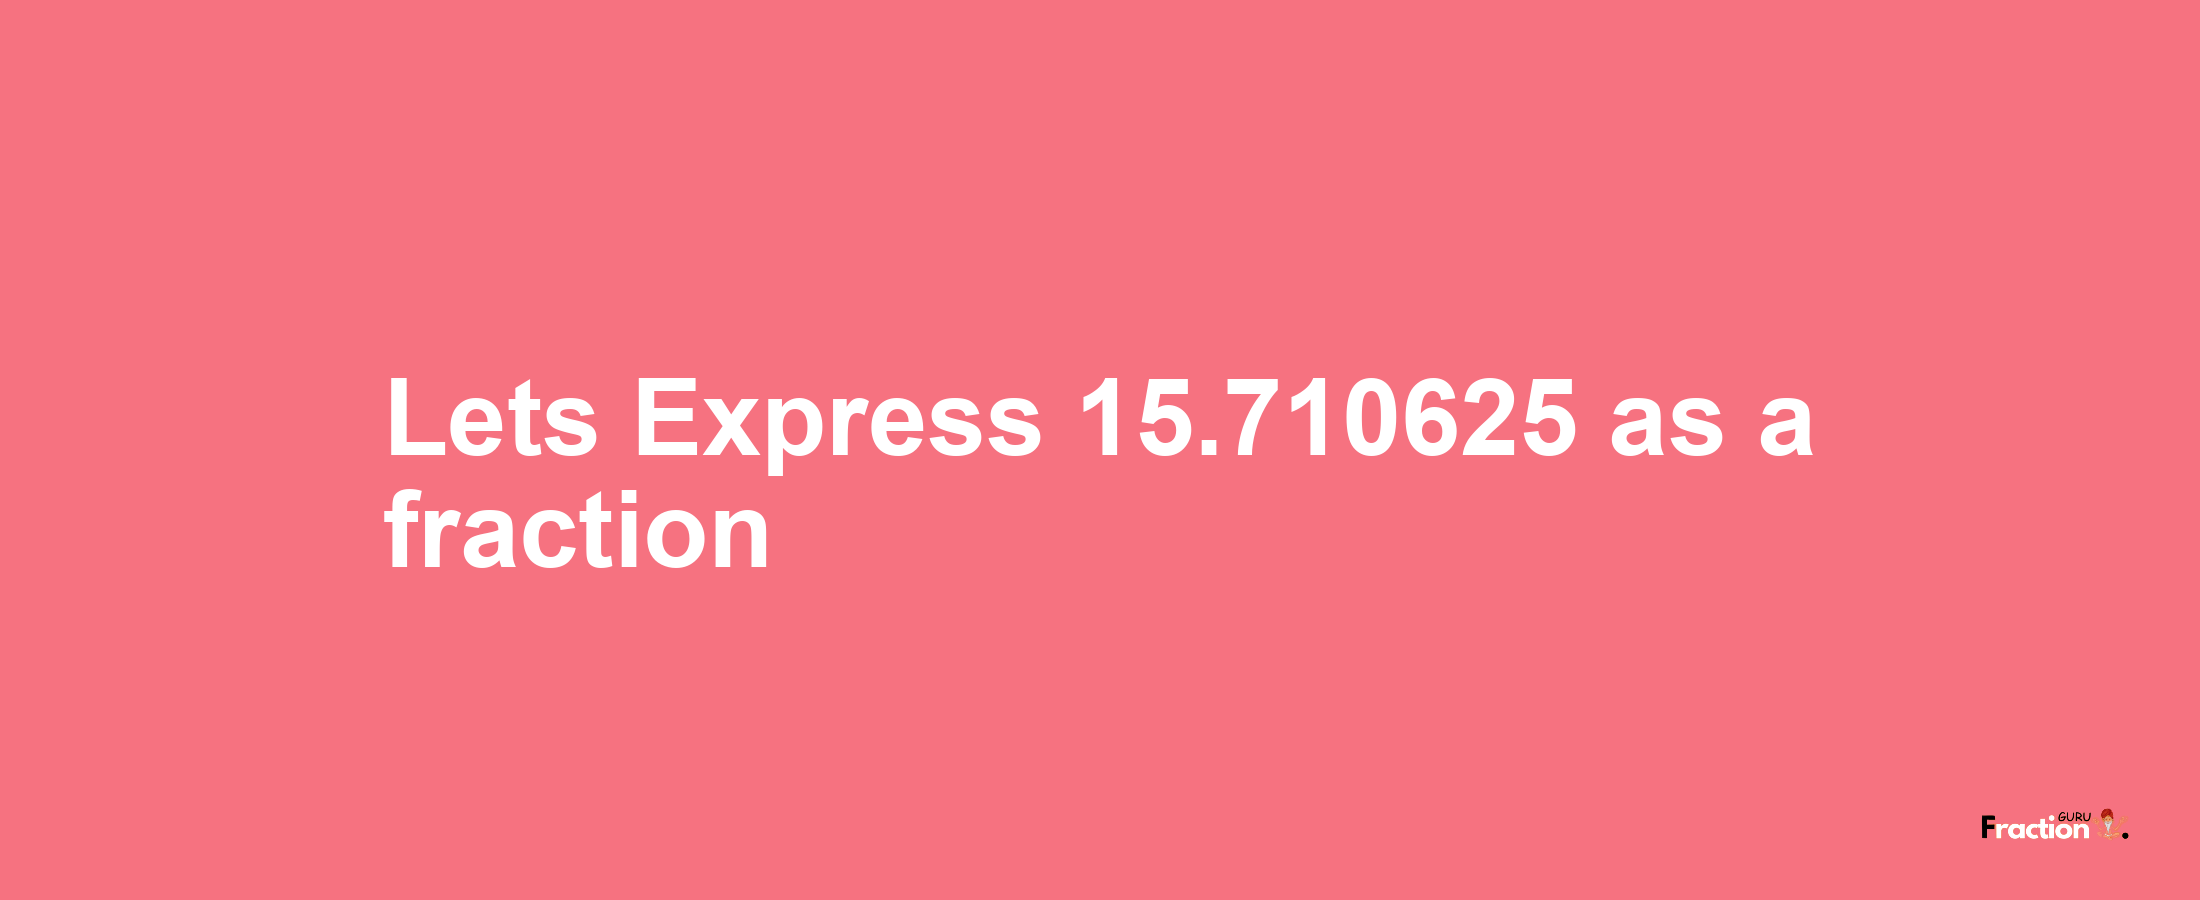 Lets Express 15.710625 as afraction